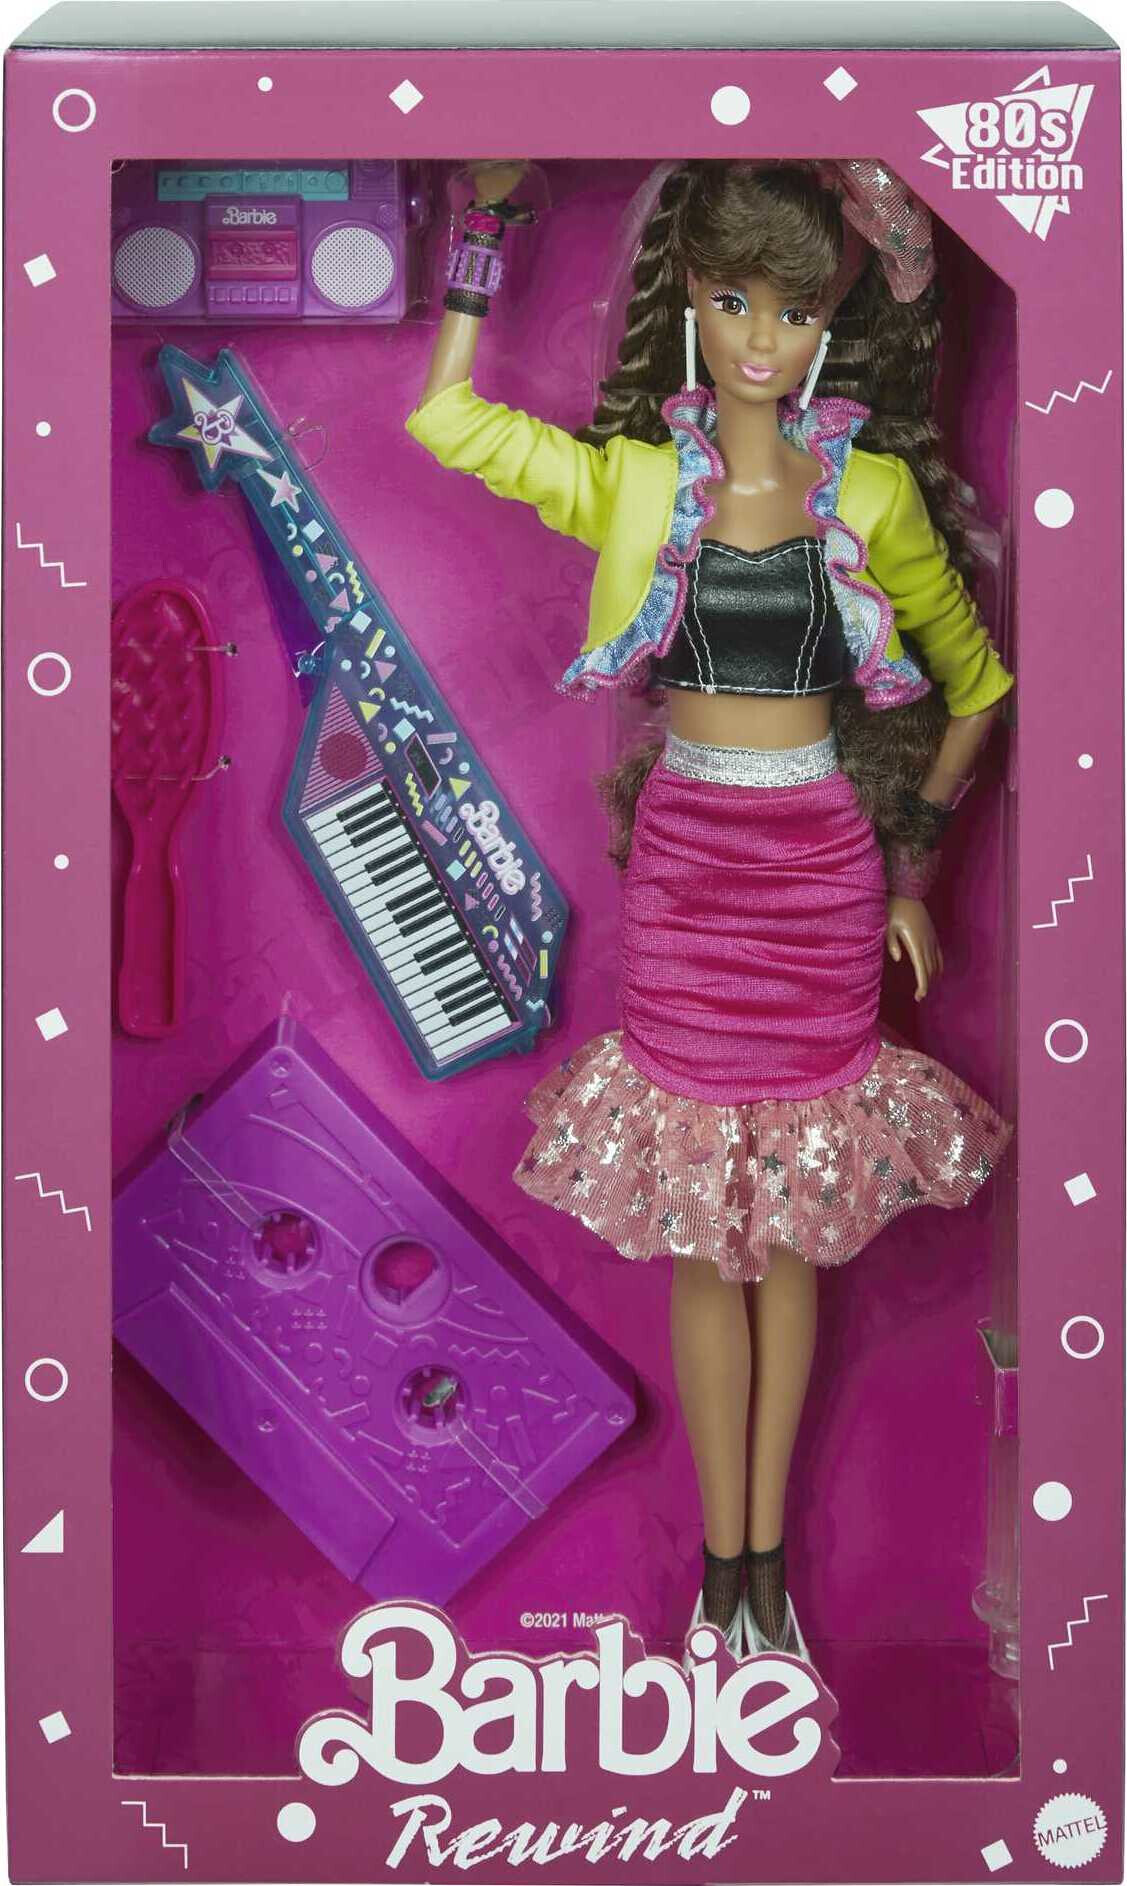 Barbie Rewind '80s Edition Collectible Doll with Night Out Look & Music Accessories - image 7 of 7